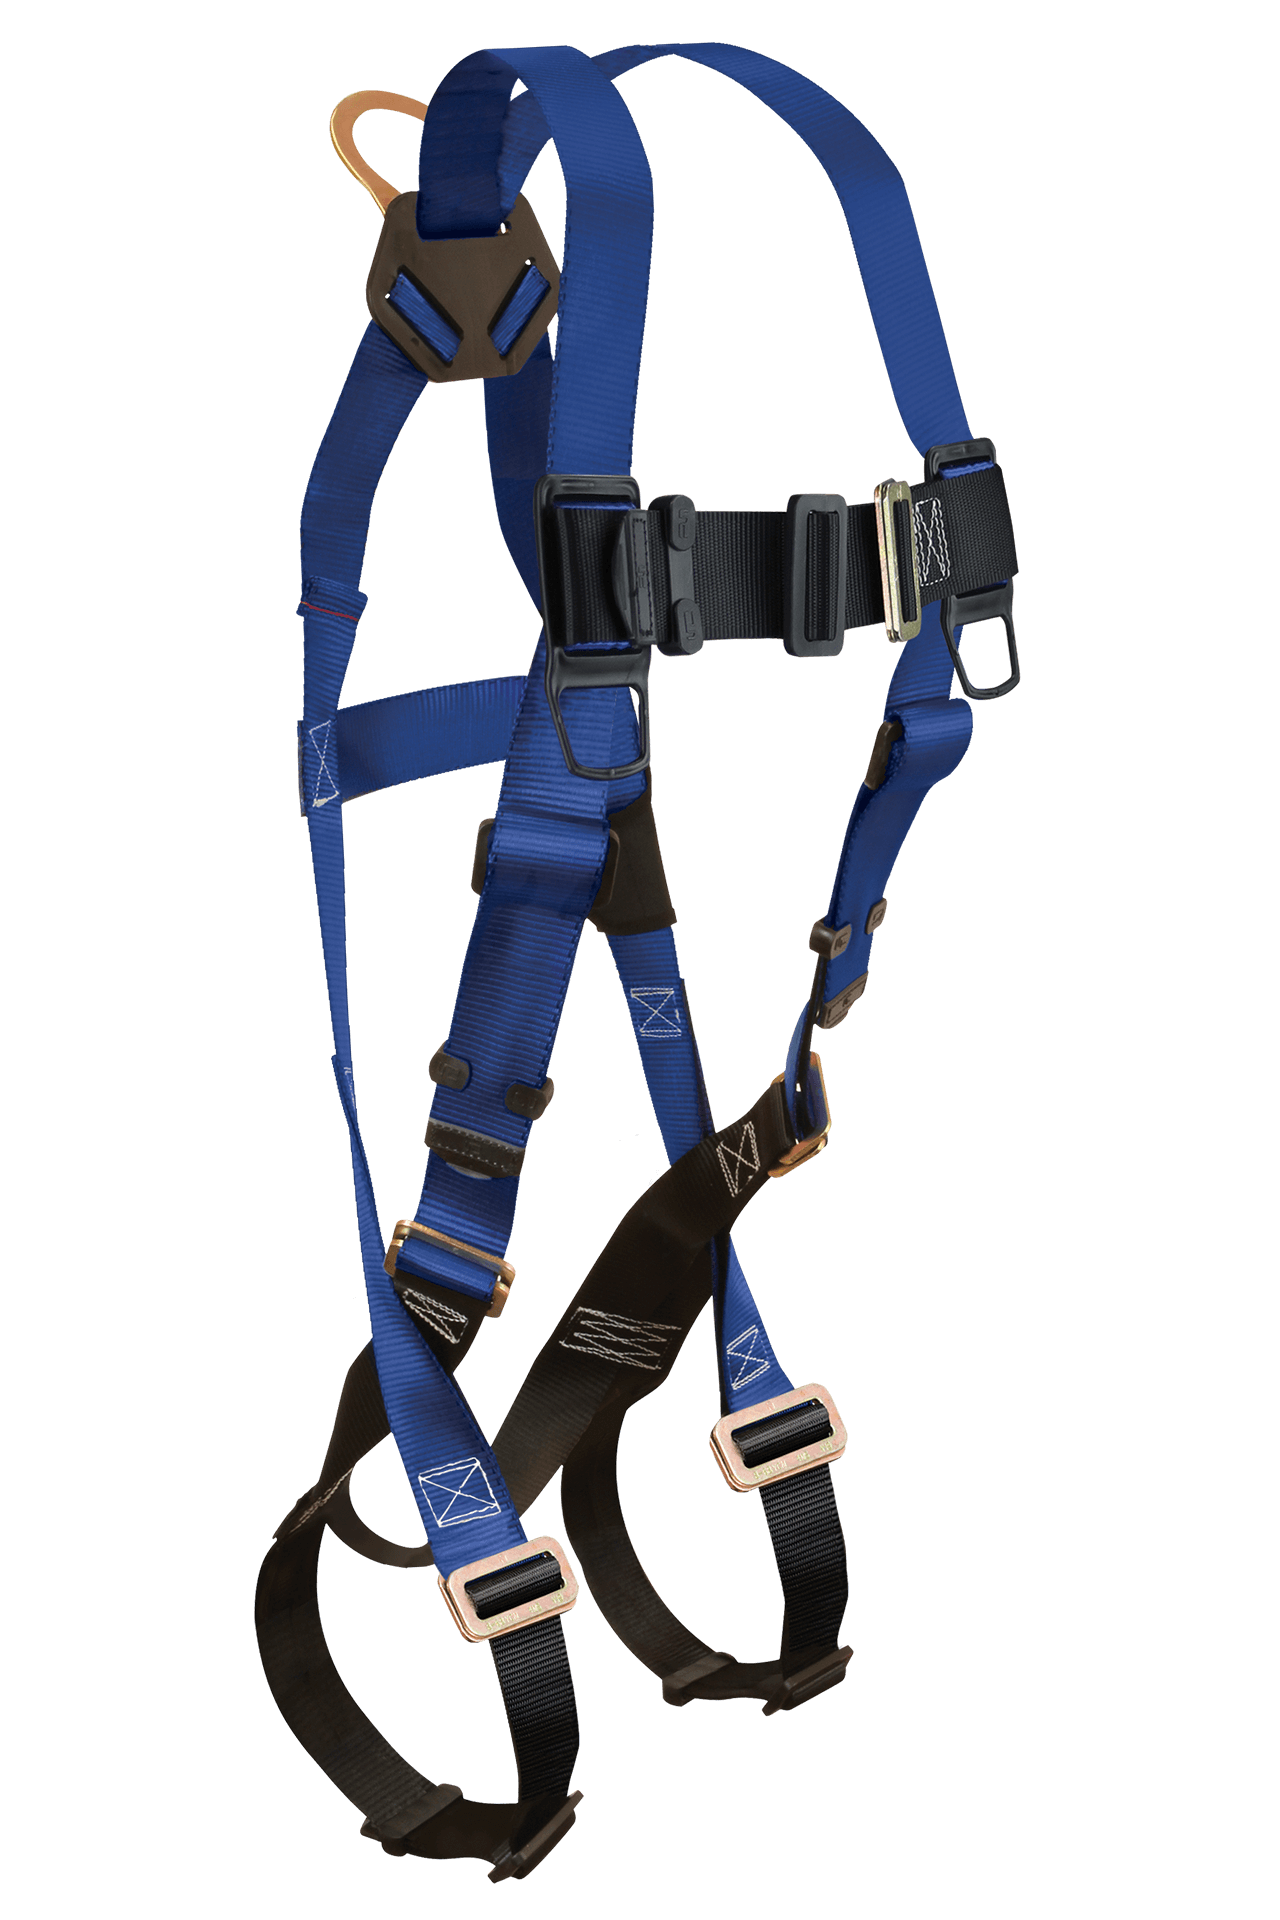 Contractor 1D Standard Non-belted Full Body Harness